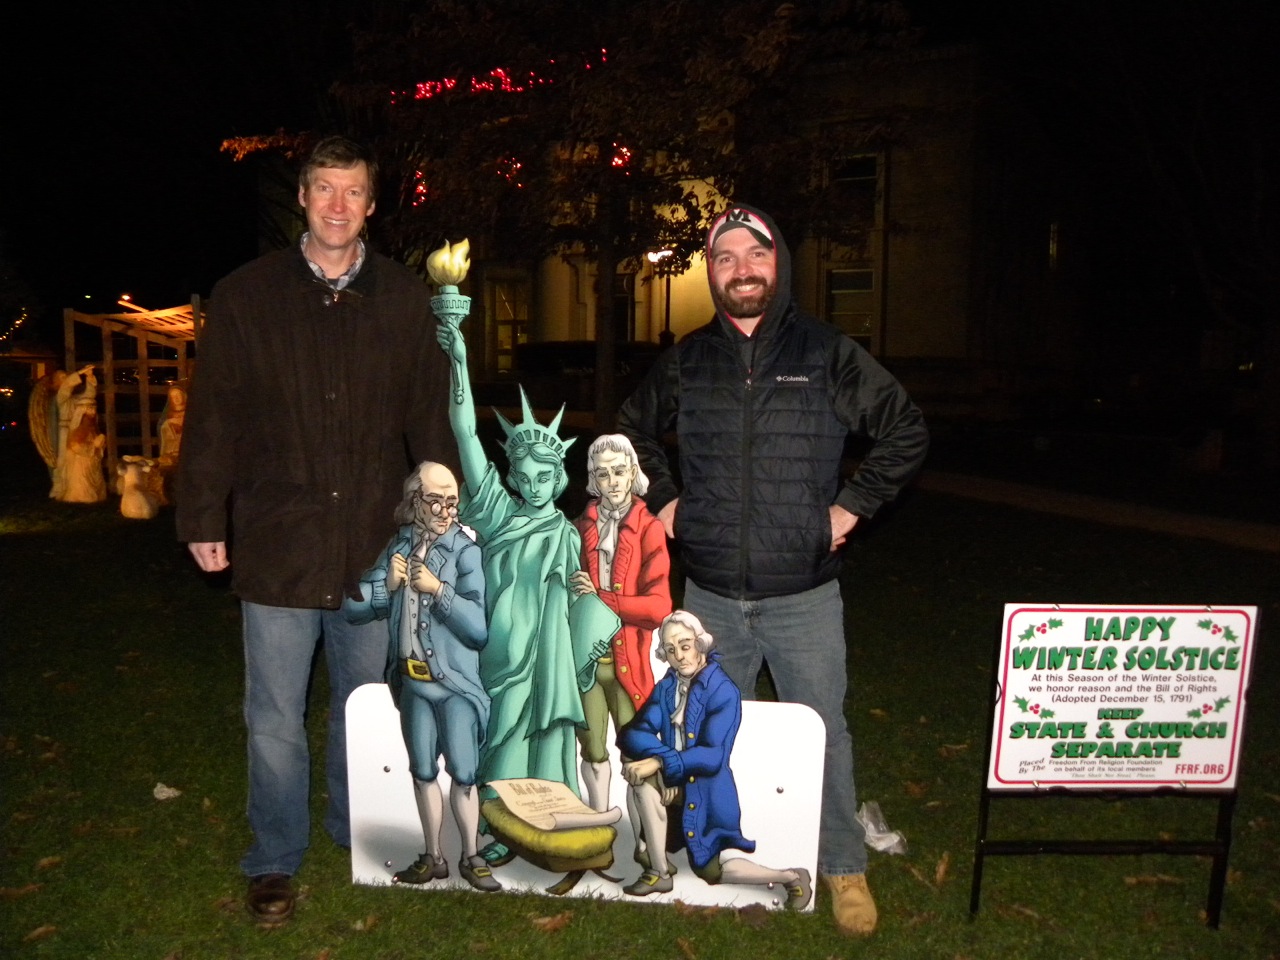 Secular Bill of Rights Display Counters Nativity Scene on Grundy County (IL) Courthouse Lawn